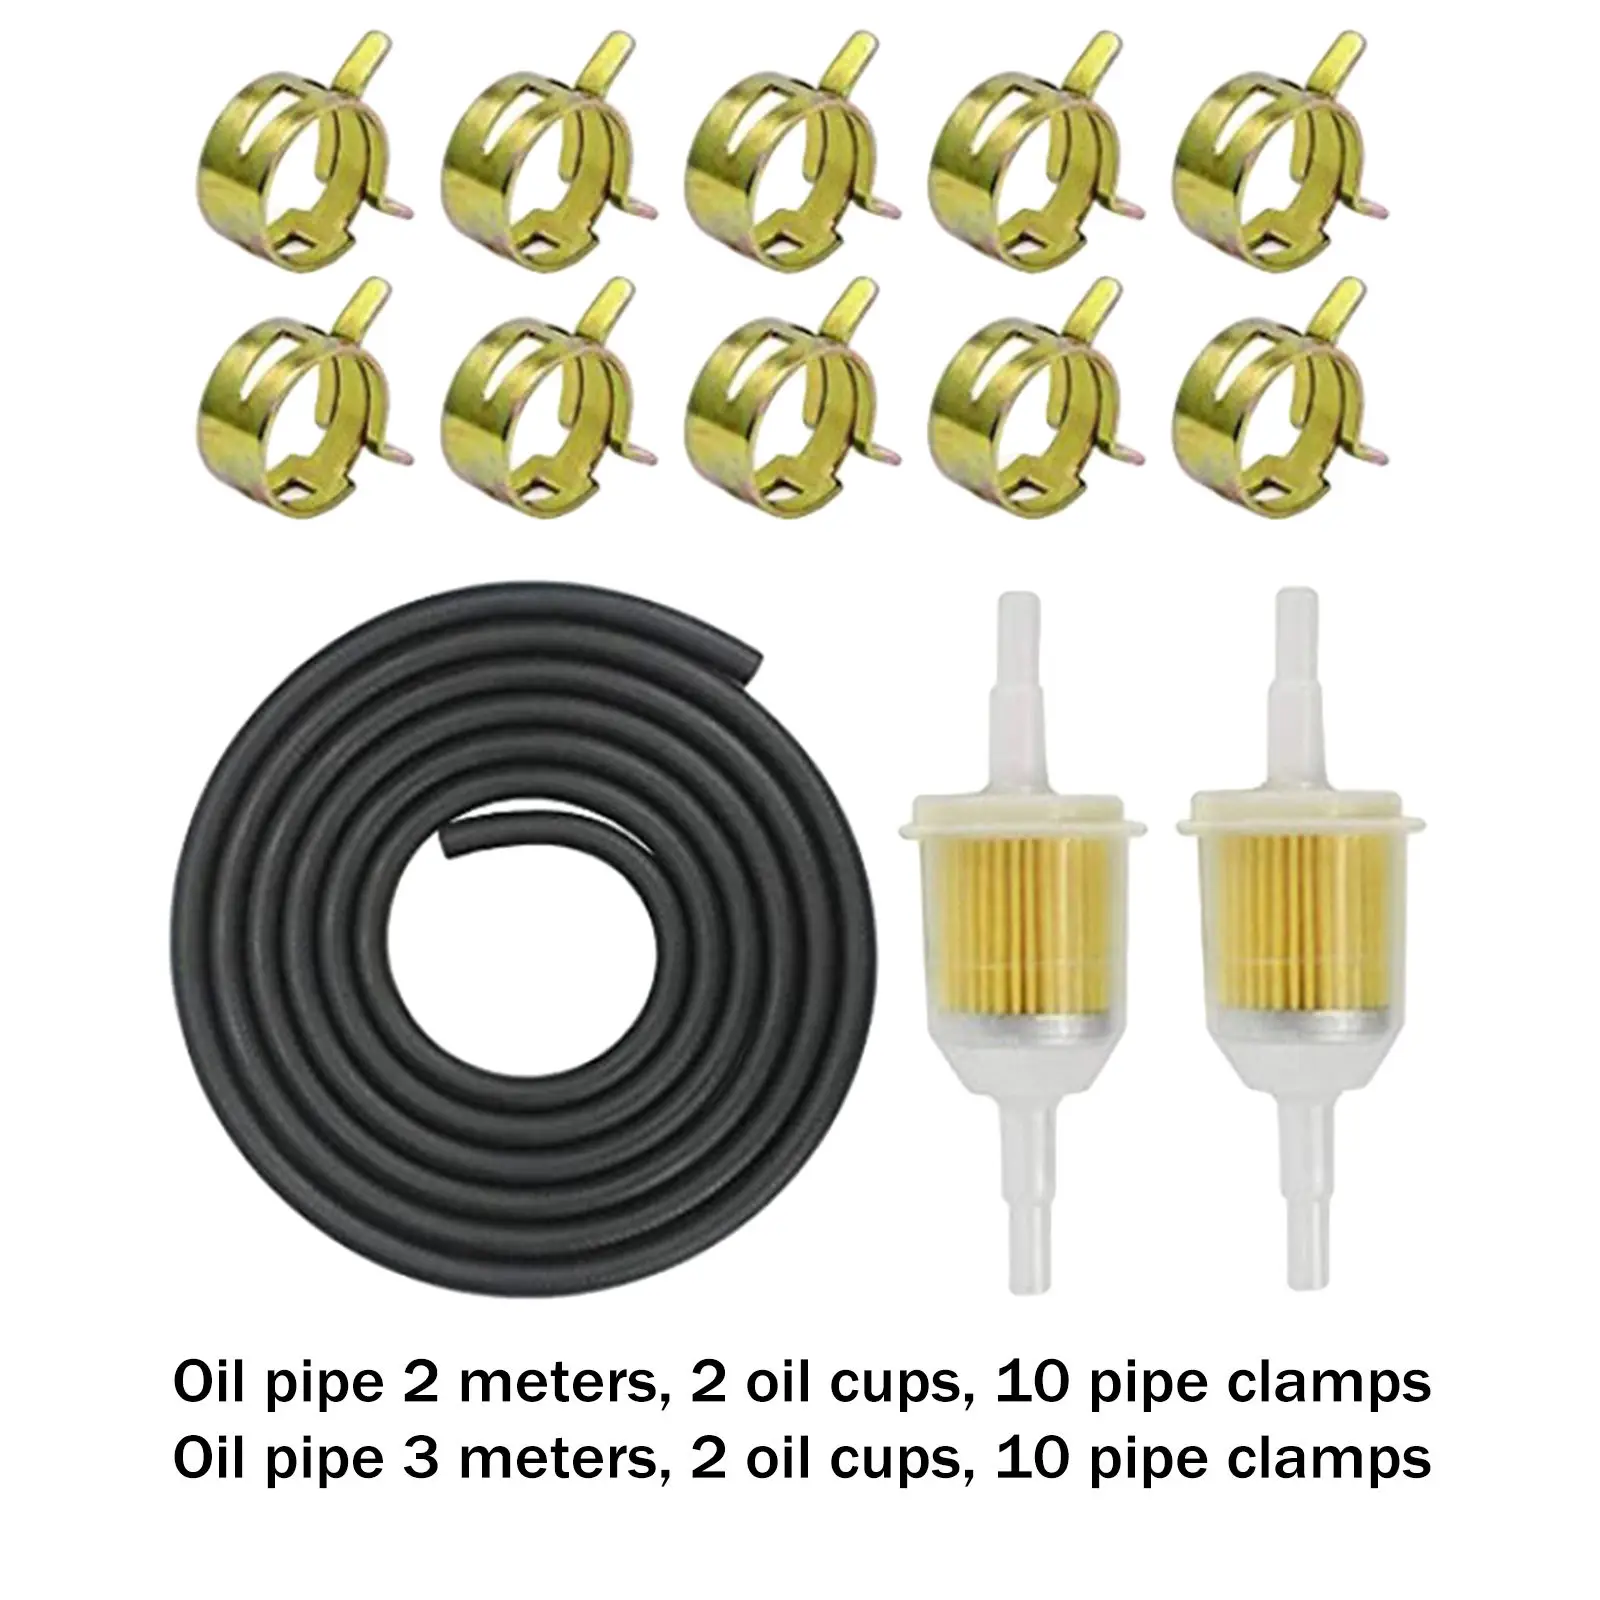 Fuel Line Hose Set 10Pieces Hose Clamps for Small Tractors Lawn Mowers Motorcycles Weight Machines Accessories Parts